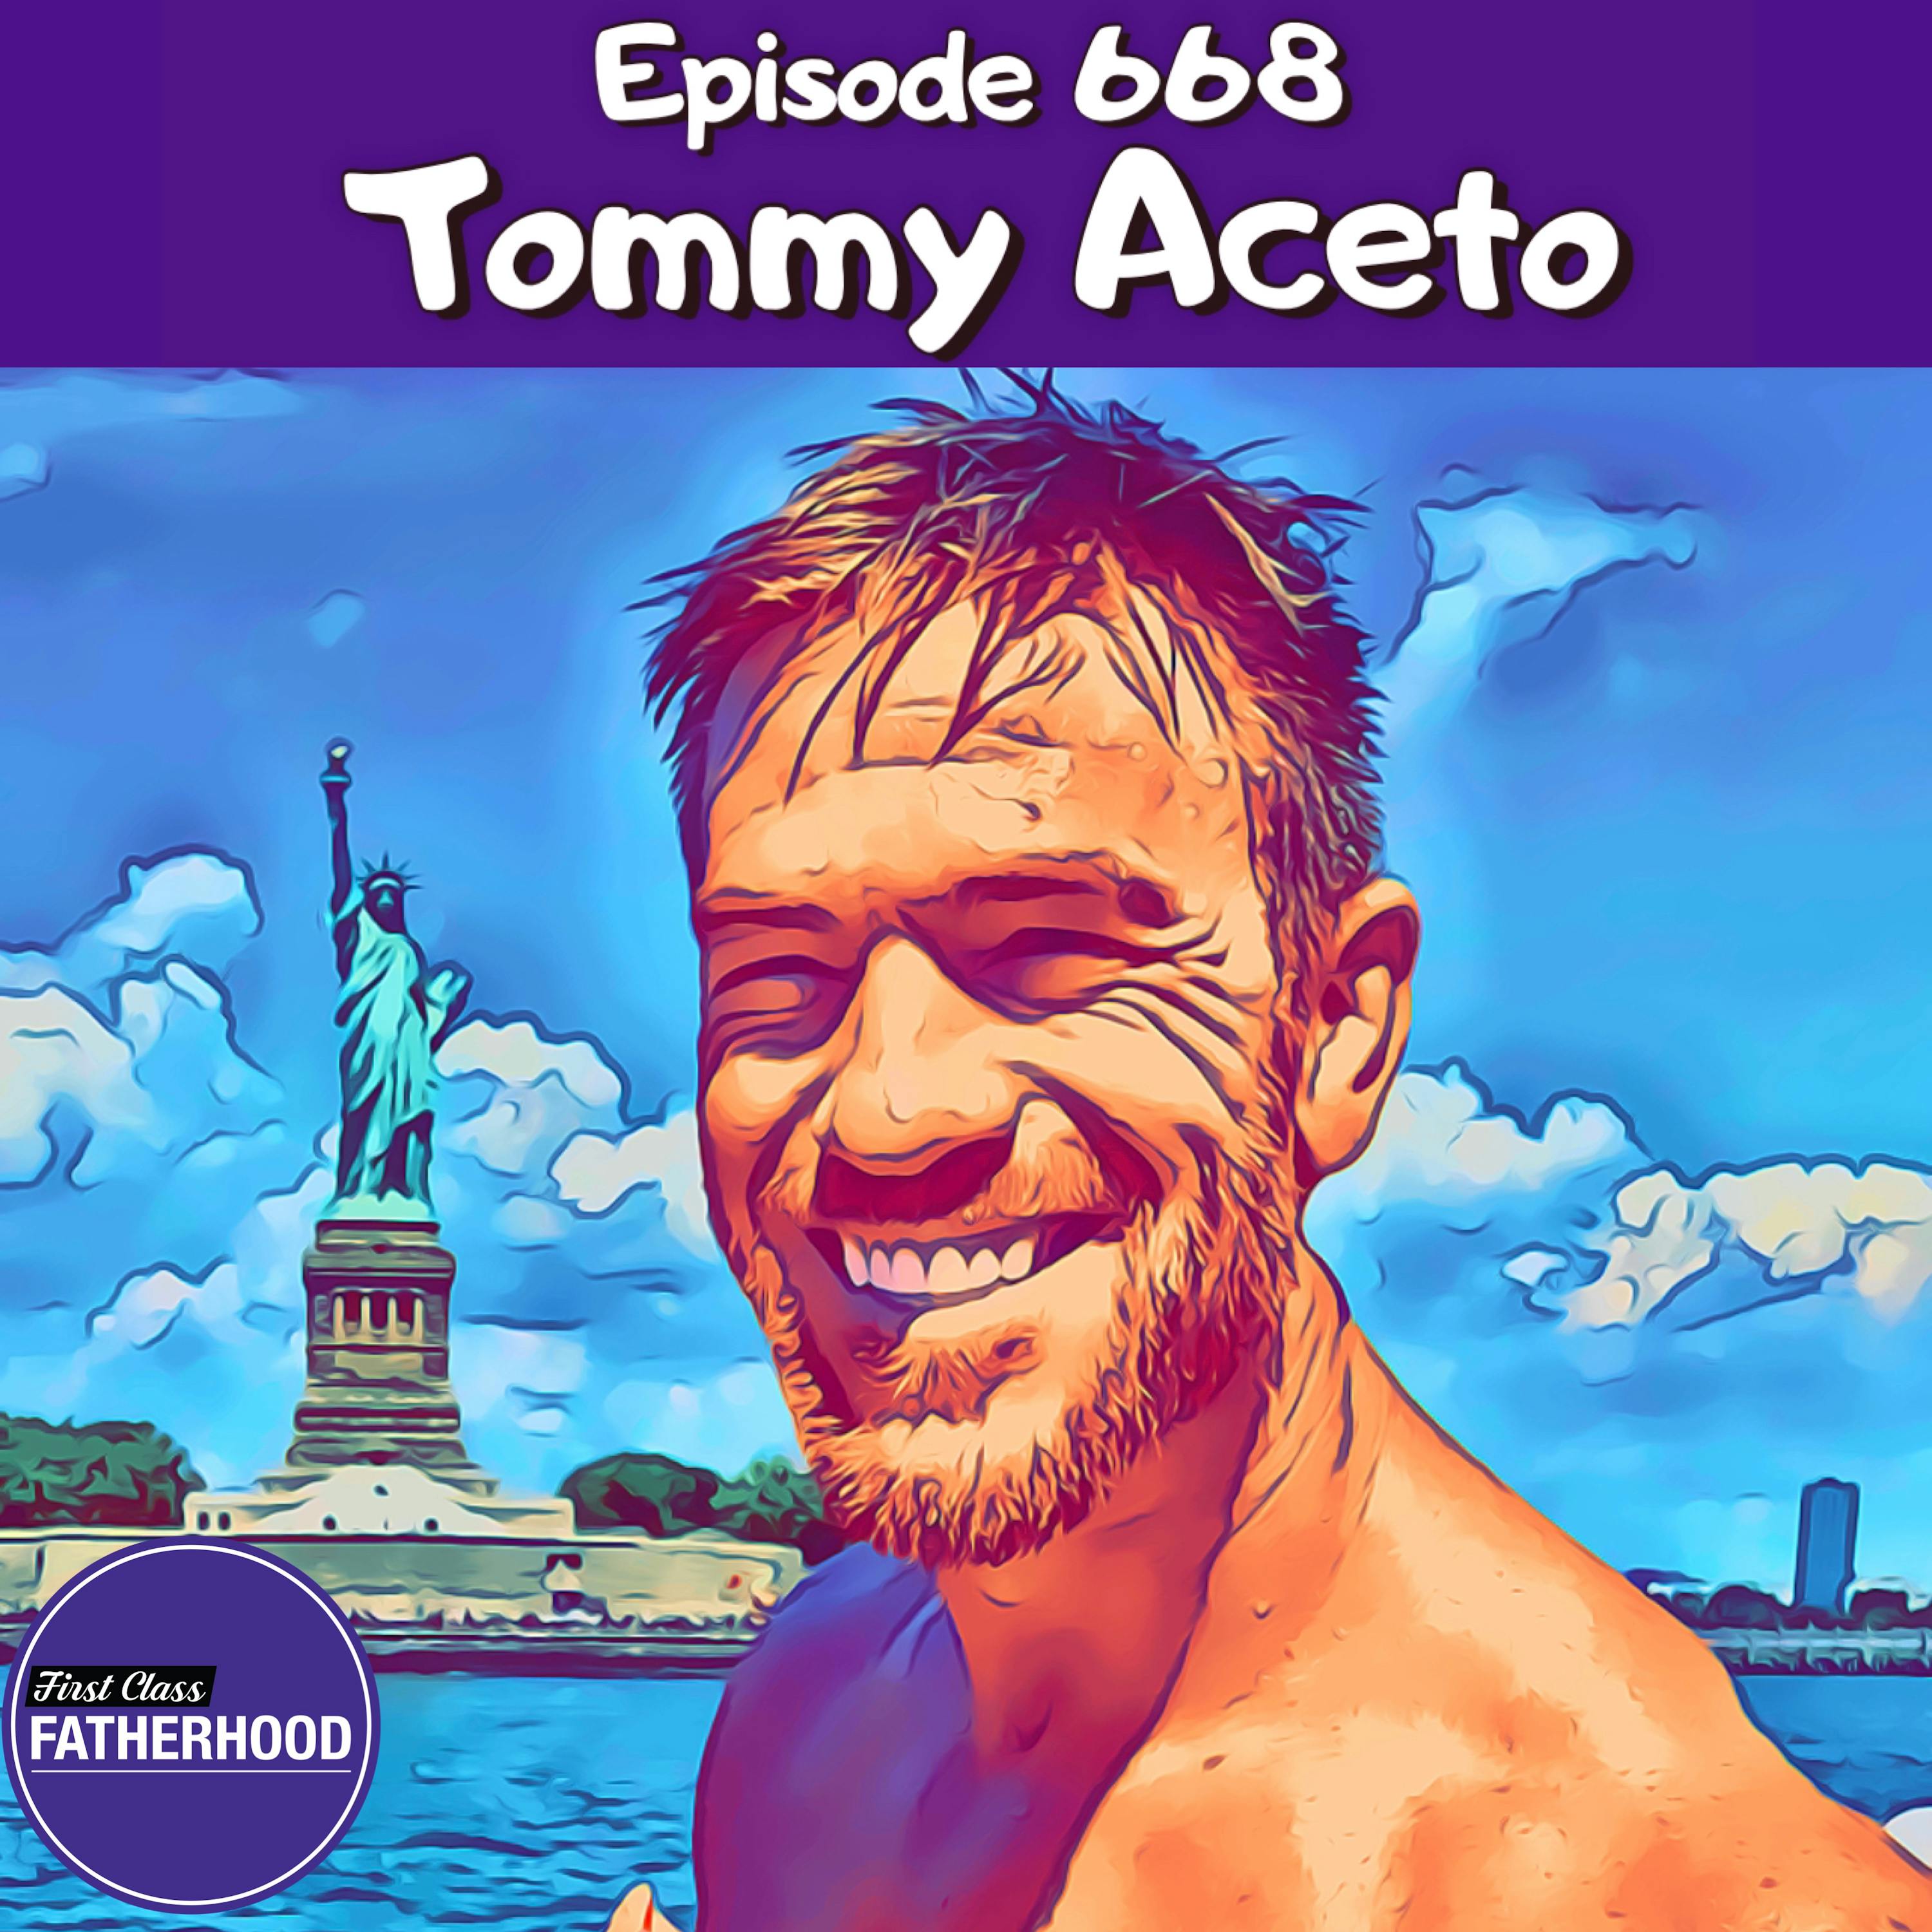 #668 Tommy Aceto